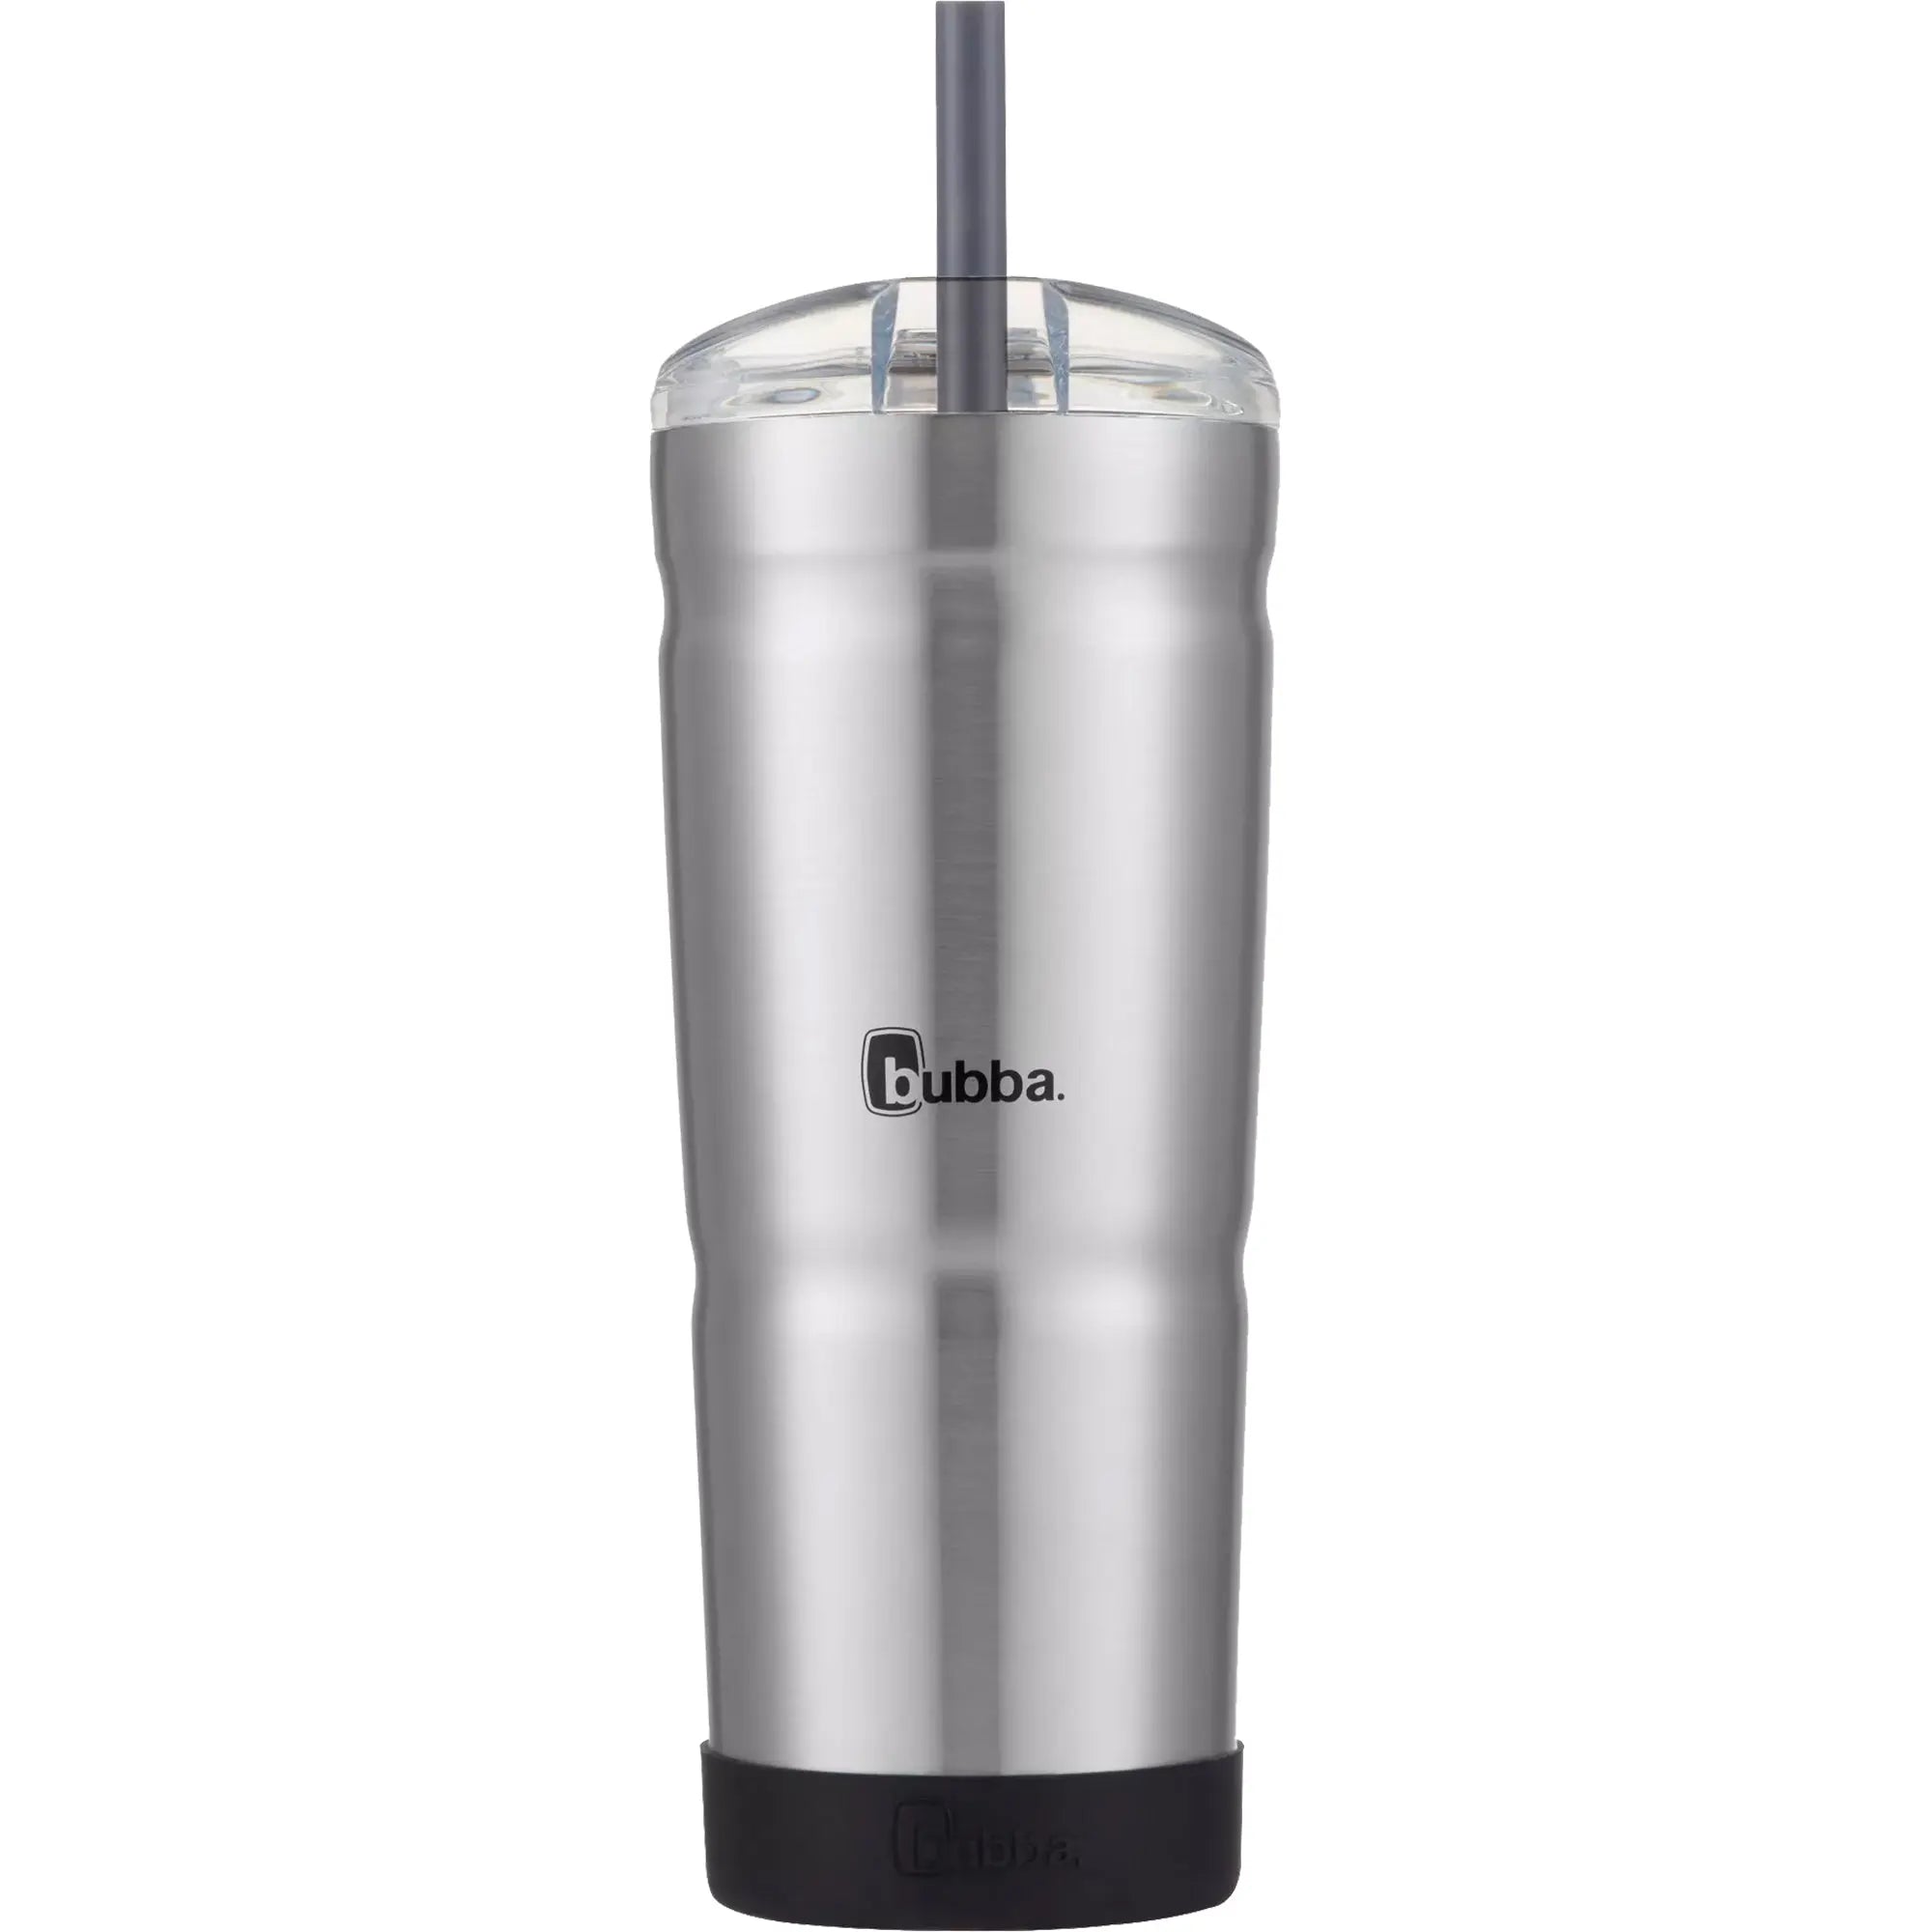 Bubba 24 oz. Envy Vacuum Insulated Stainless Steel Tumbler with Removable Bumper Bubba